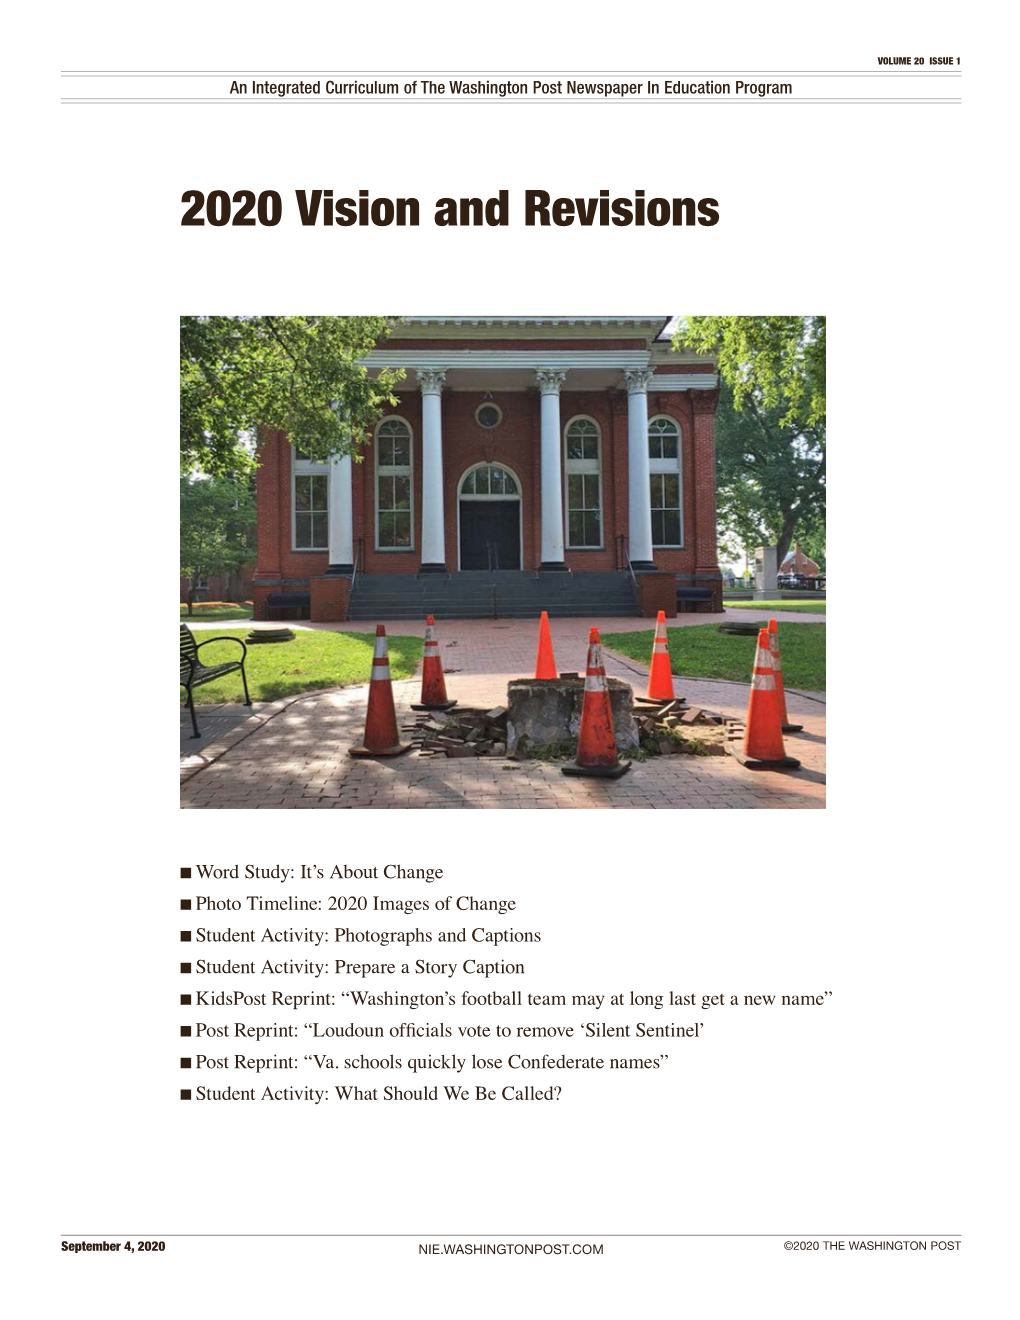 2020 Vision and Revisions